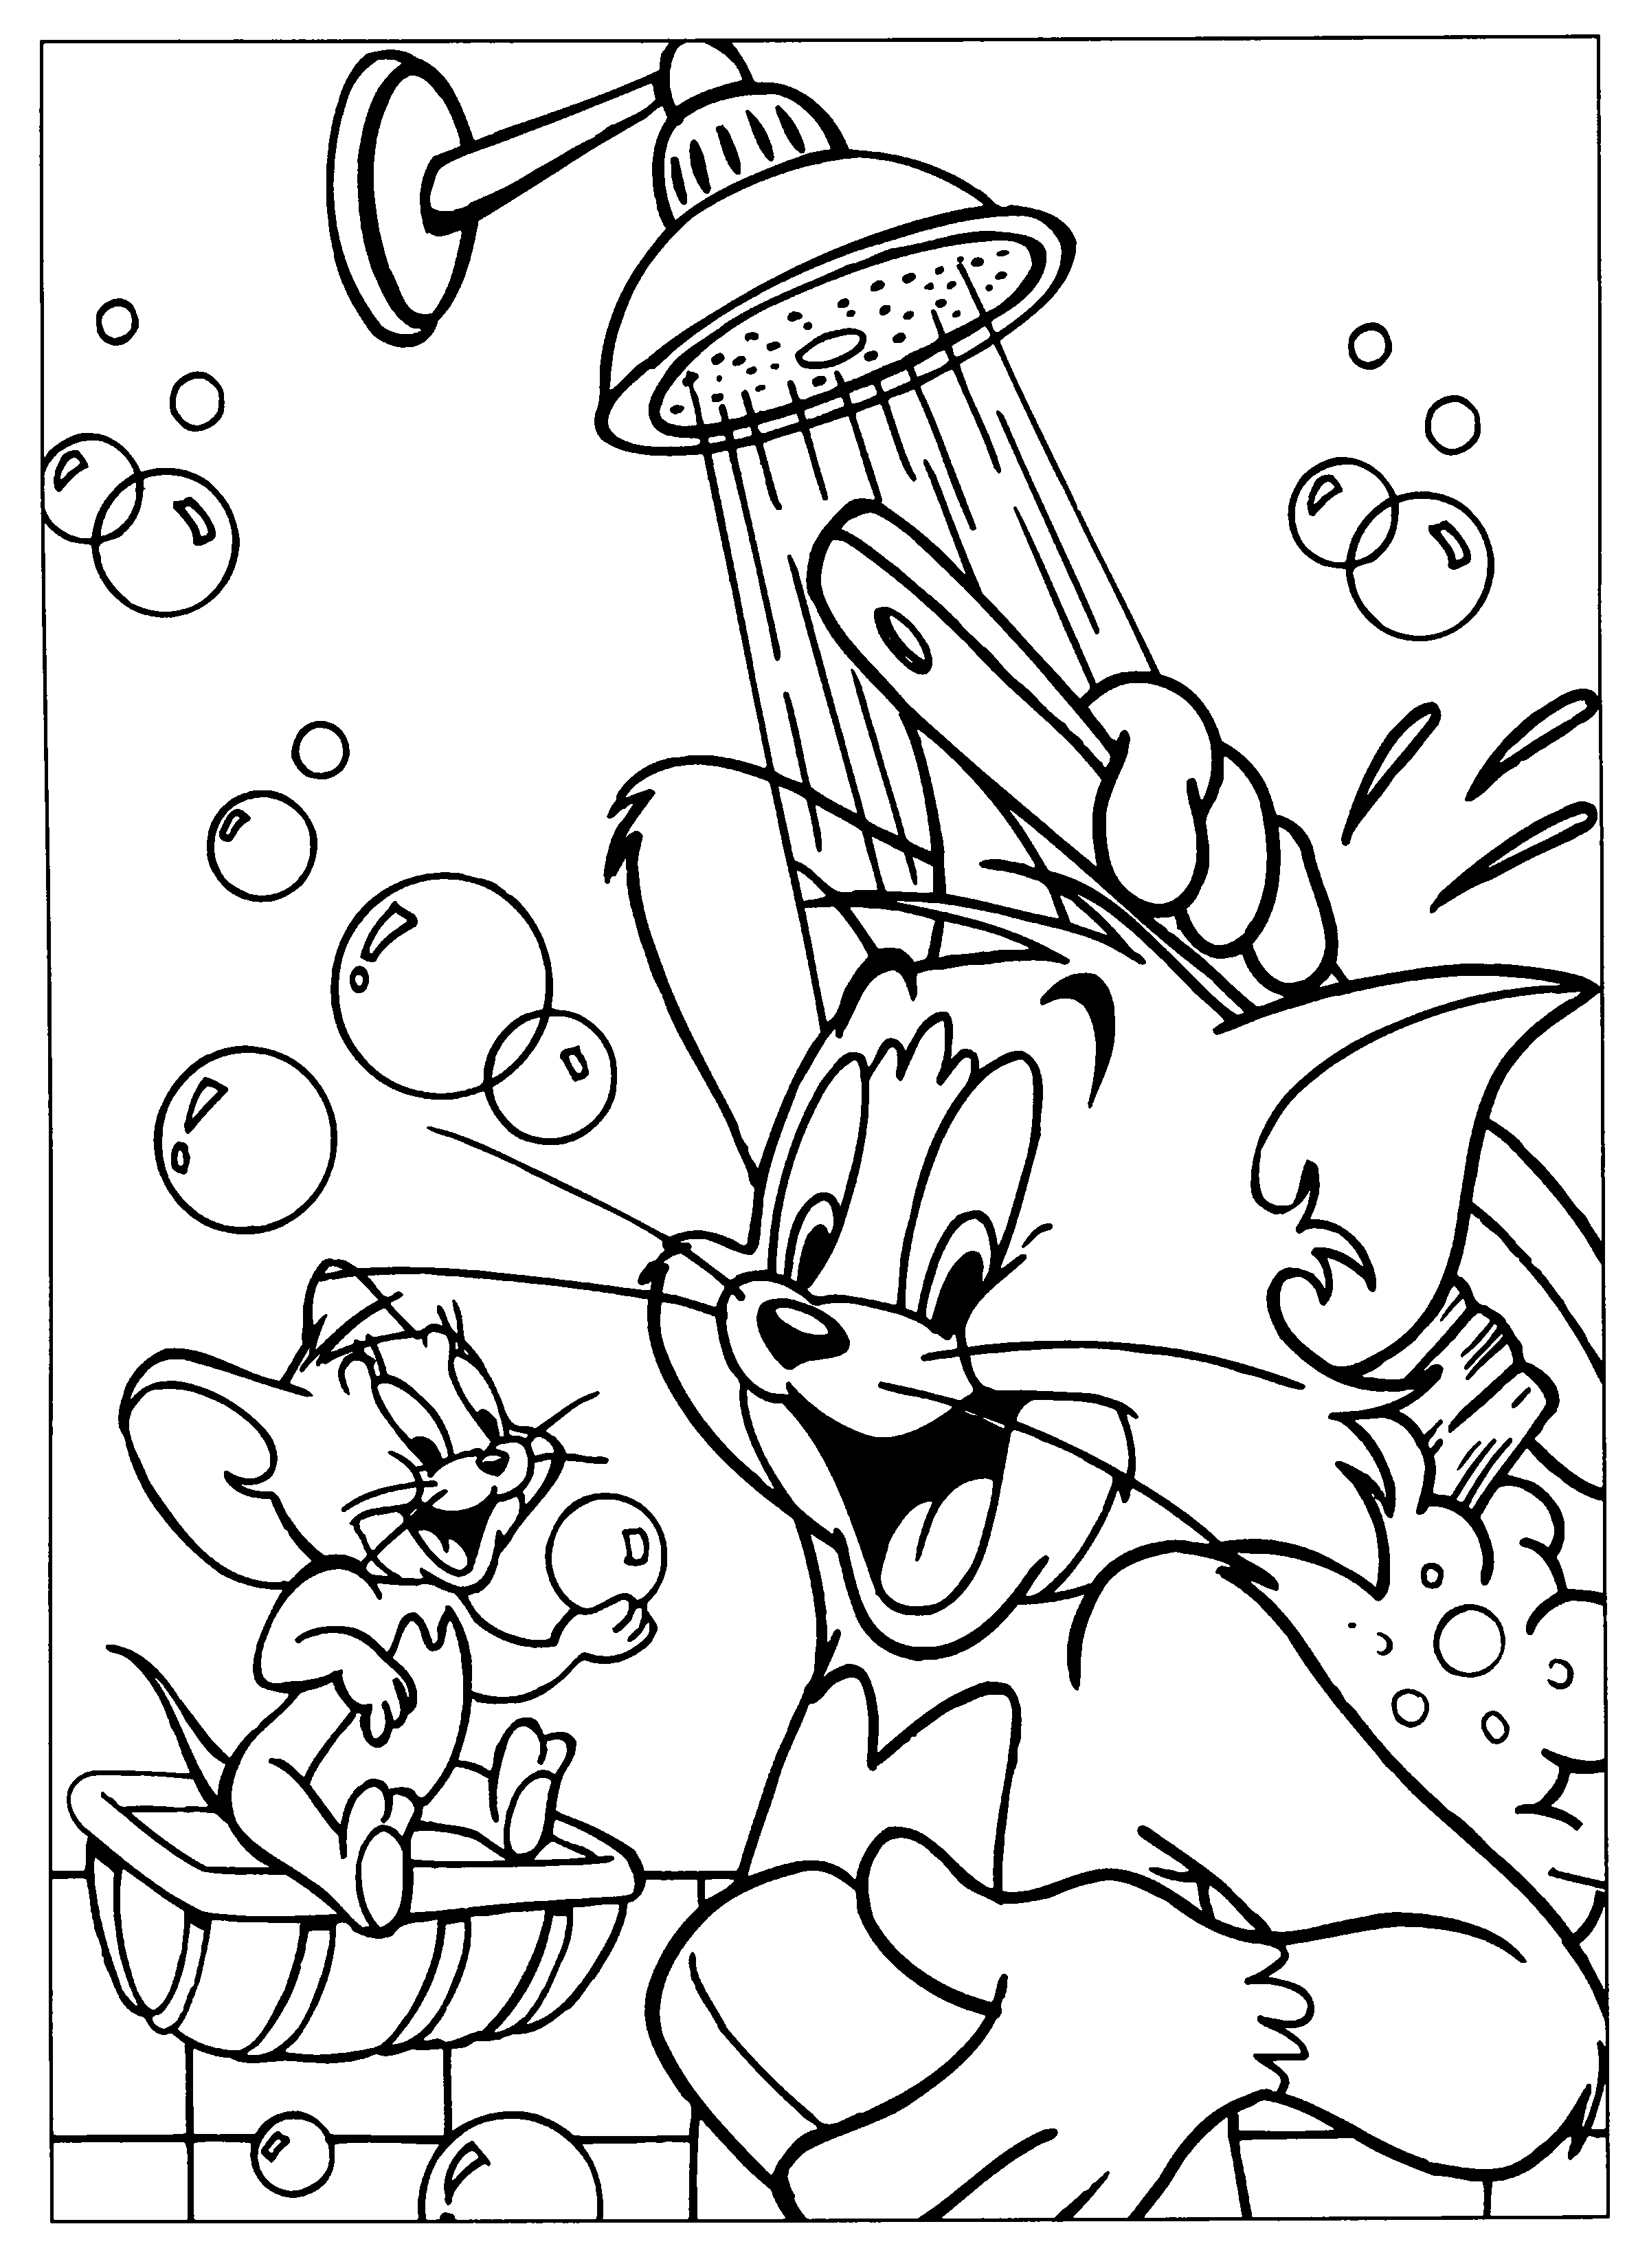 animated-coloring-pages-tom-and-jerry-image-0012